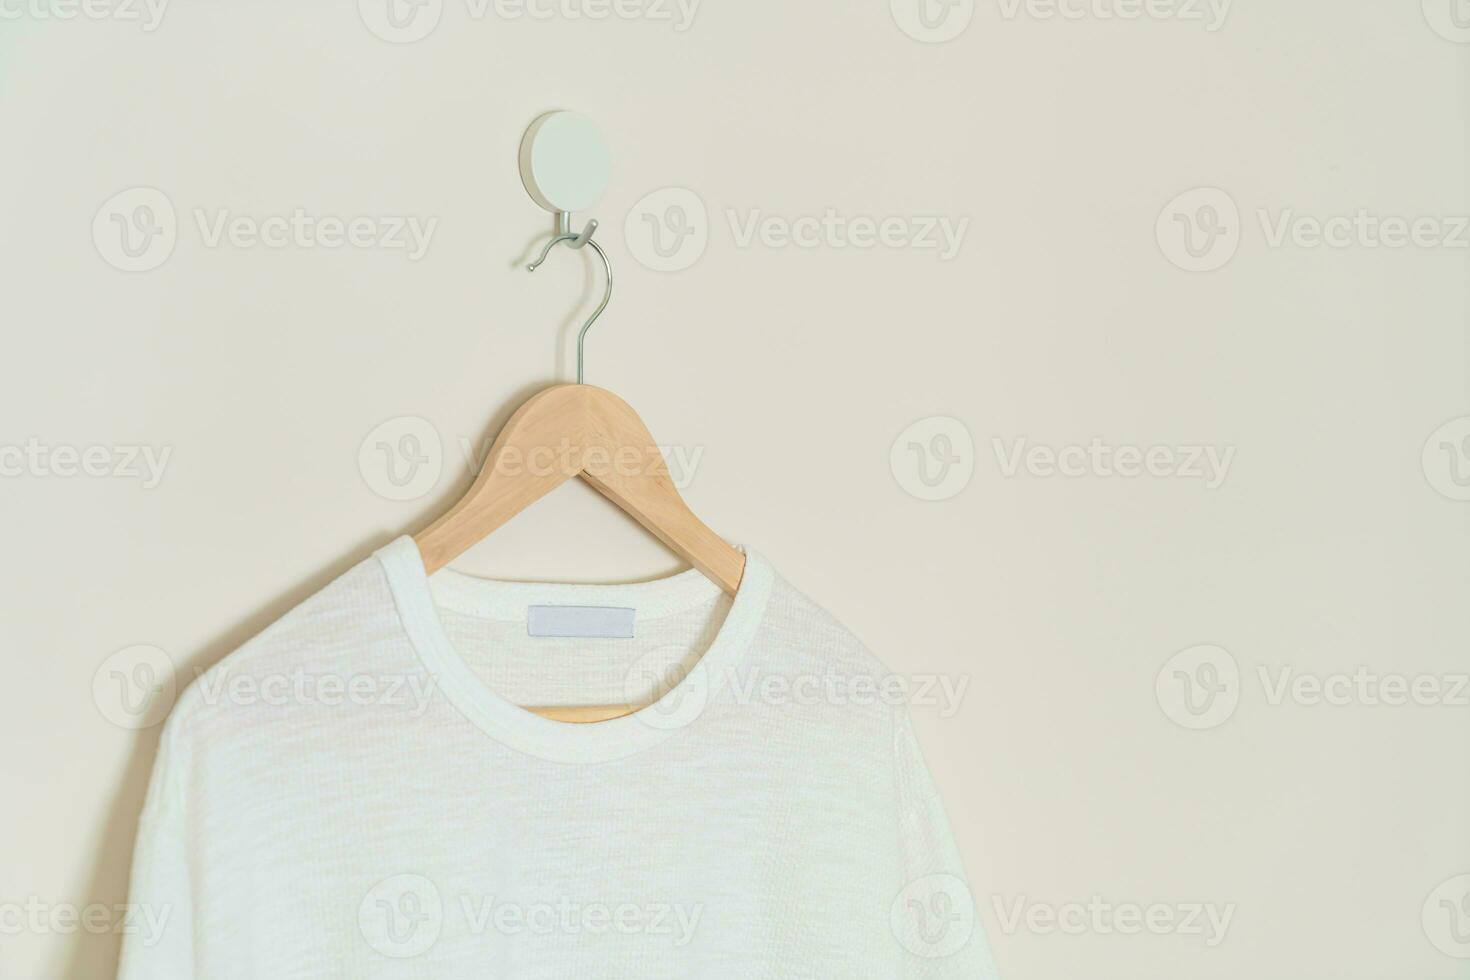 t-shirt hanging with wood hanger photo